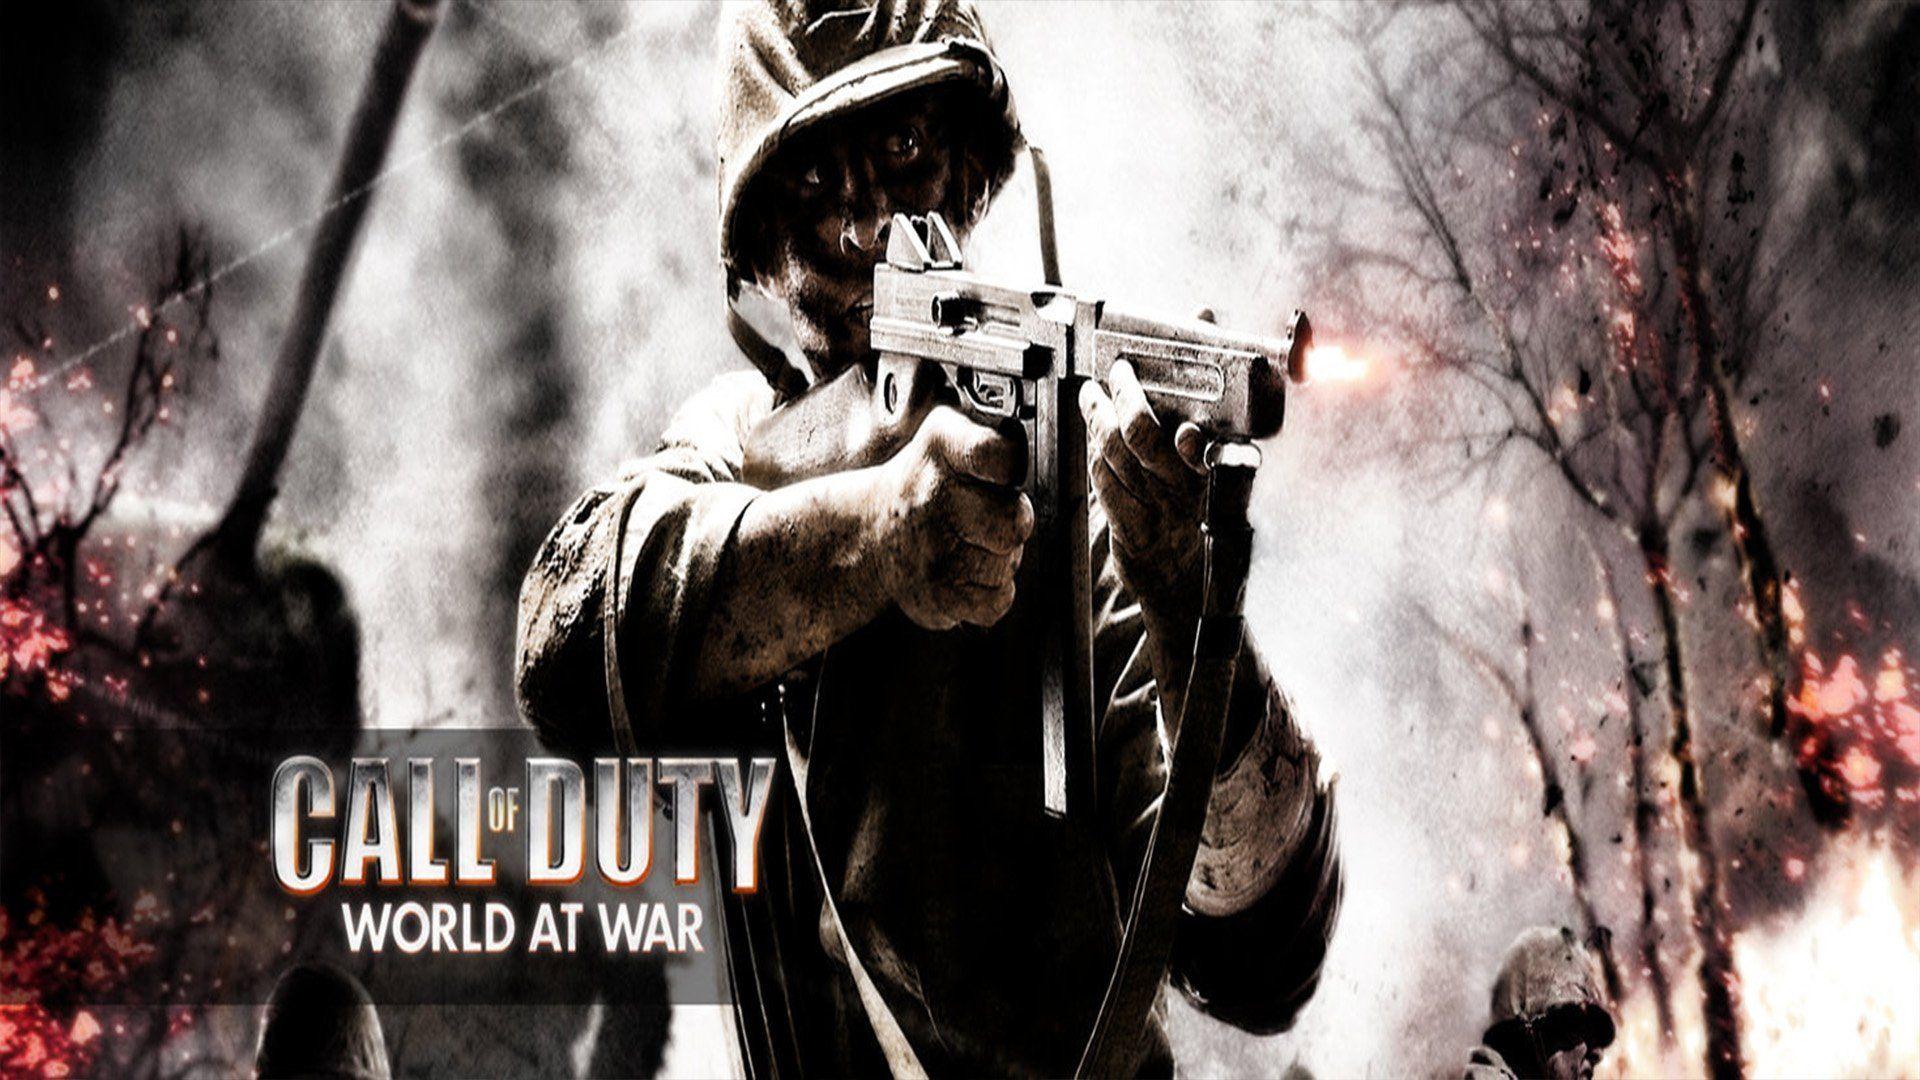 when did call of duty world at war 2 come out